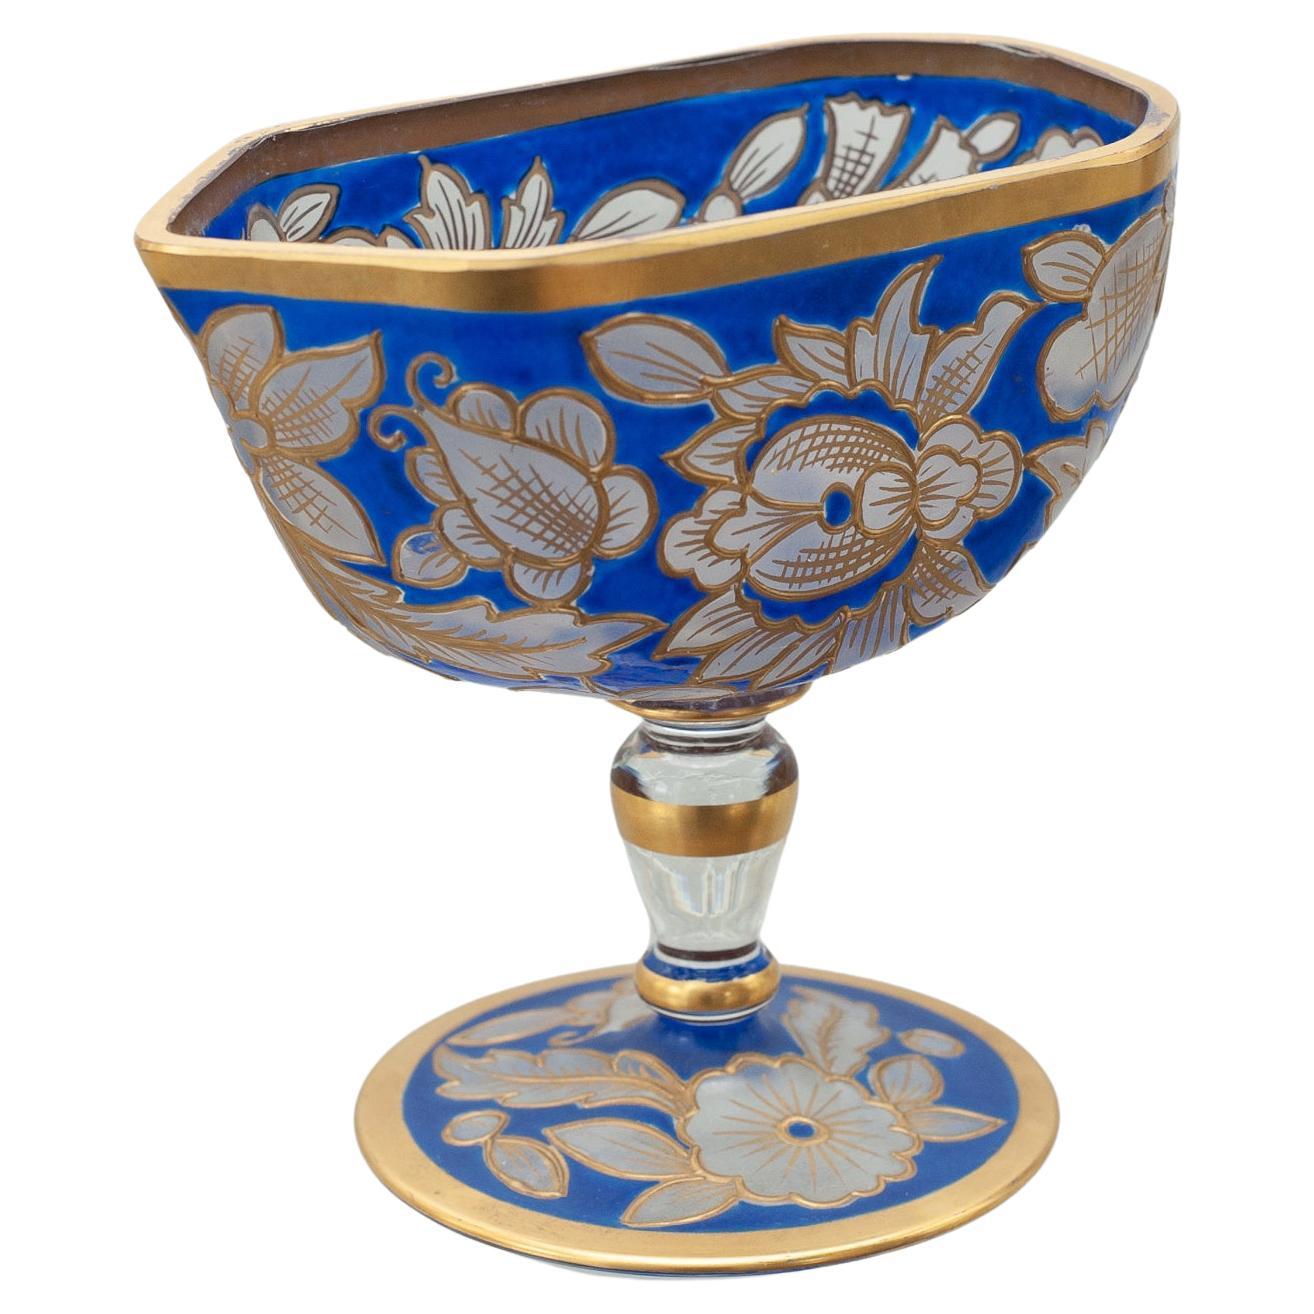 Antique Bohemian Blue and Gold Gilt Sauce Boat